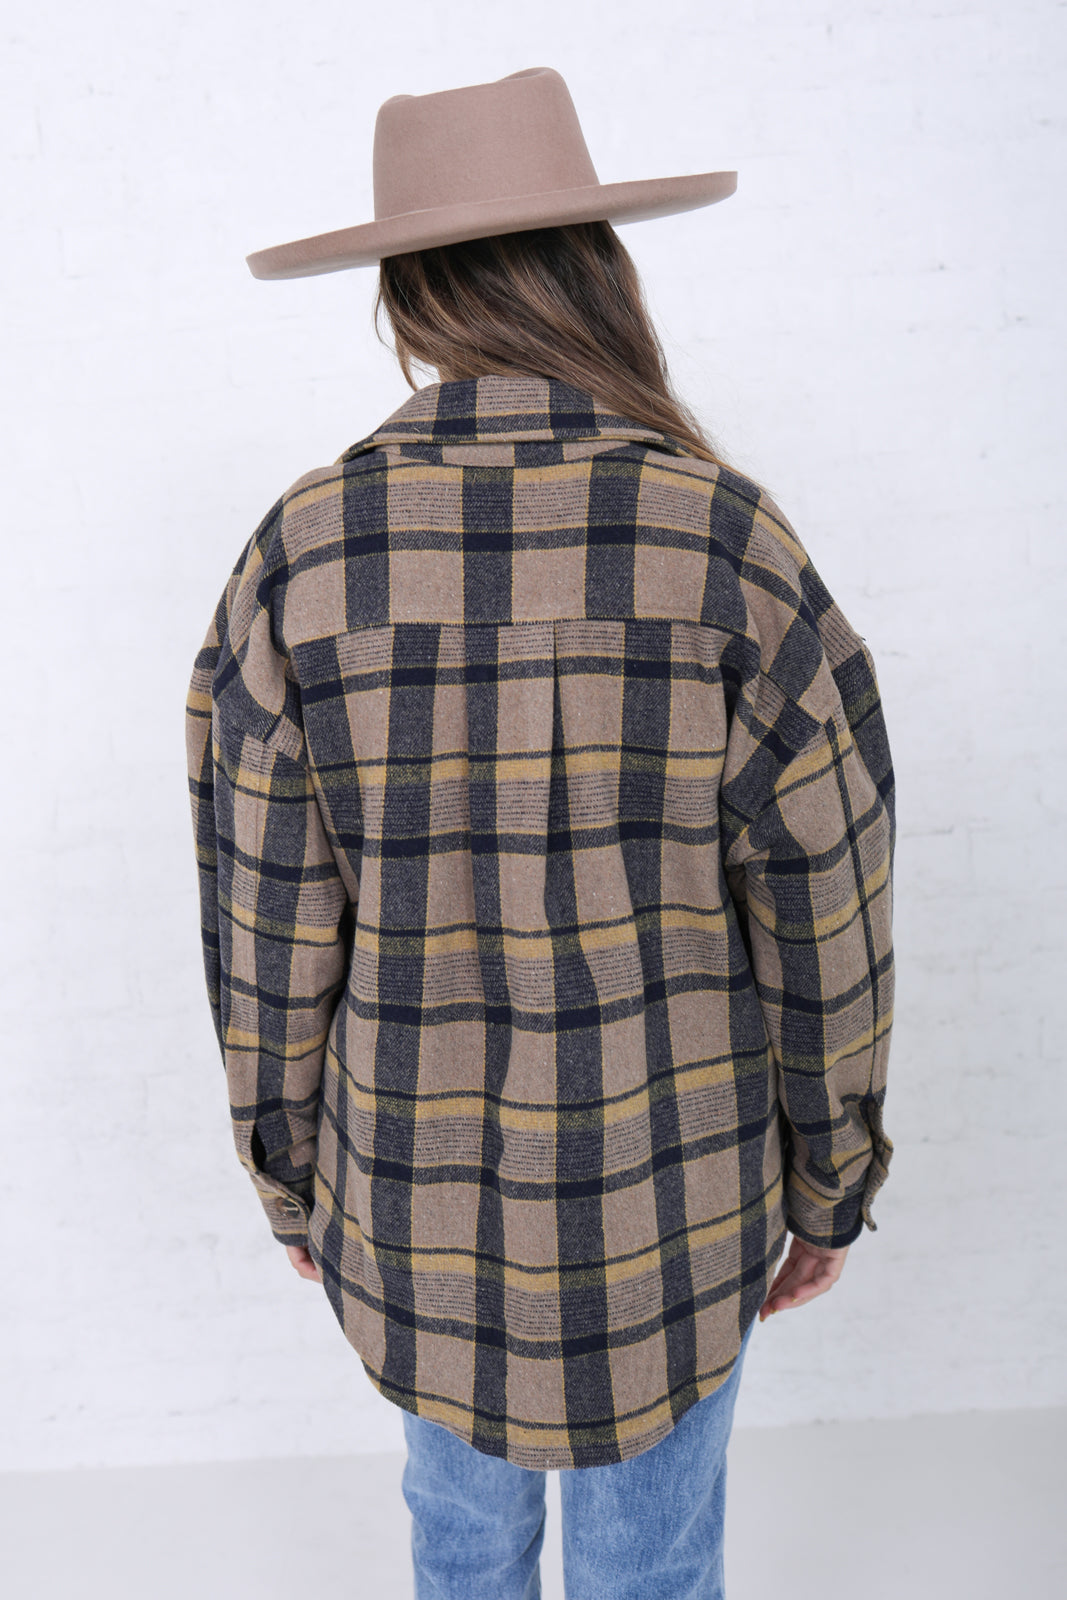 FLANNEL SHIRT JACKET IN SUGARED ALMOND PLAID FINAL SALE